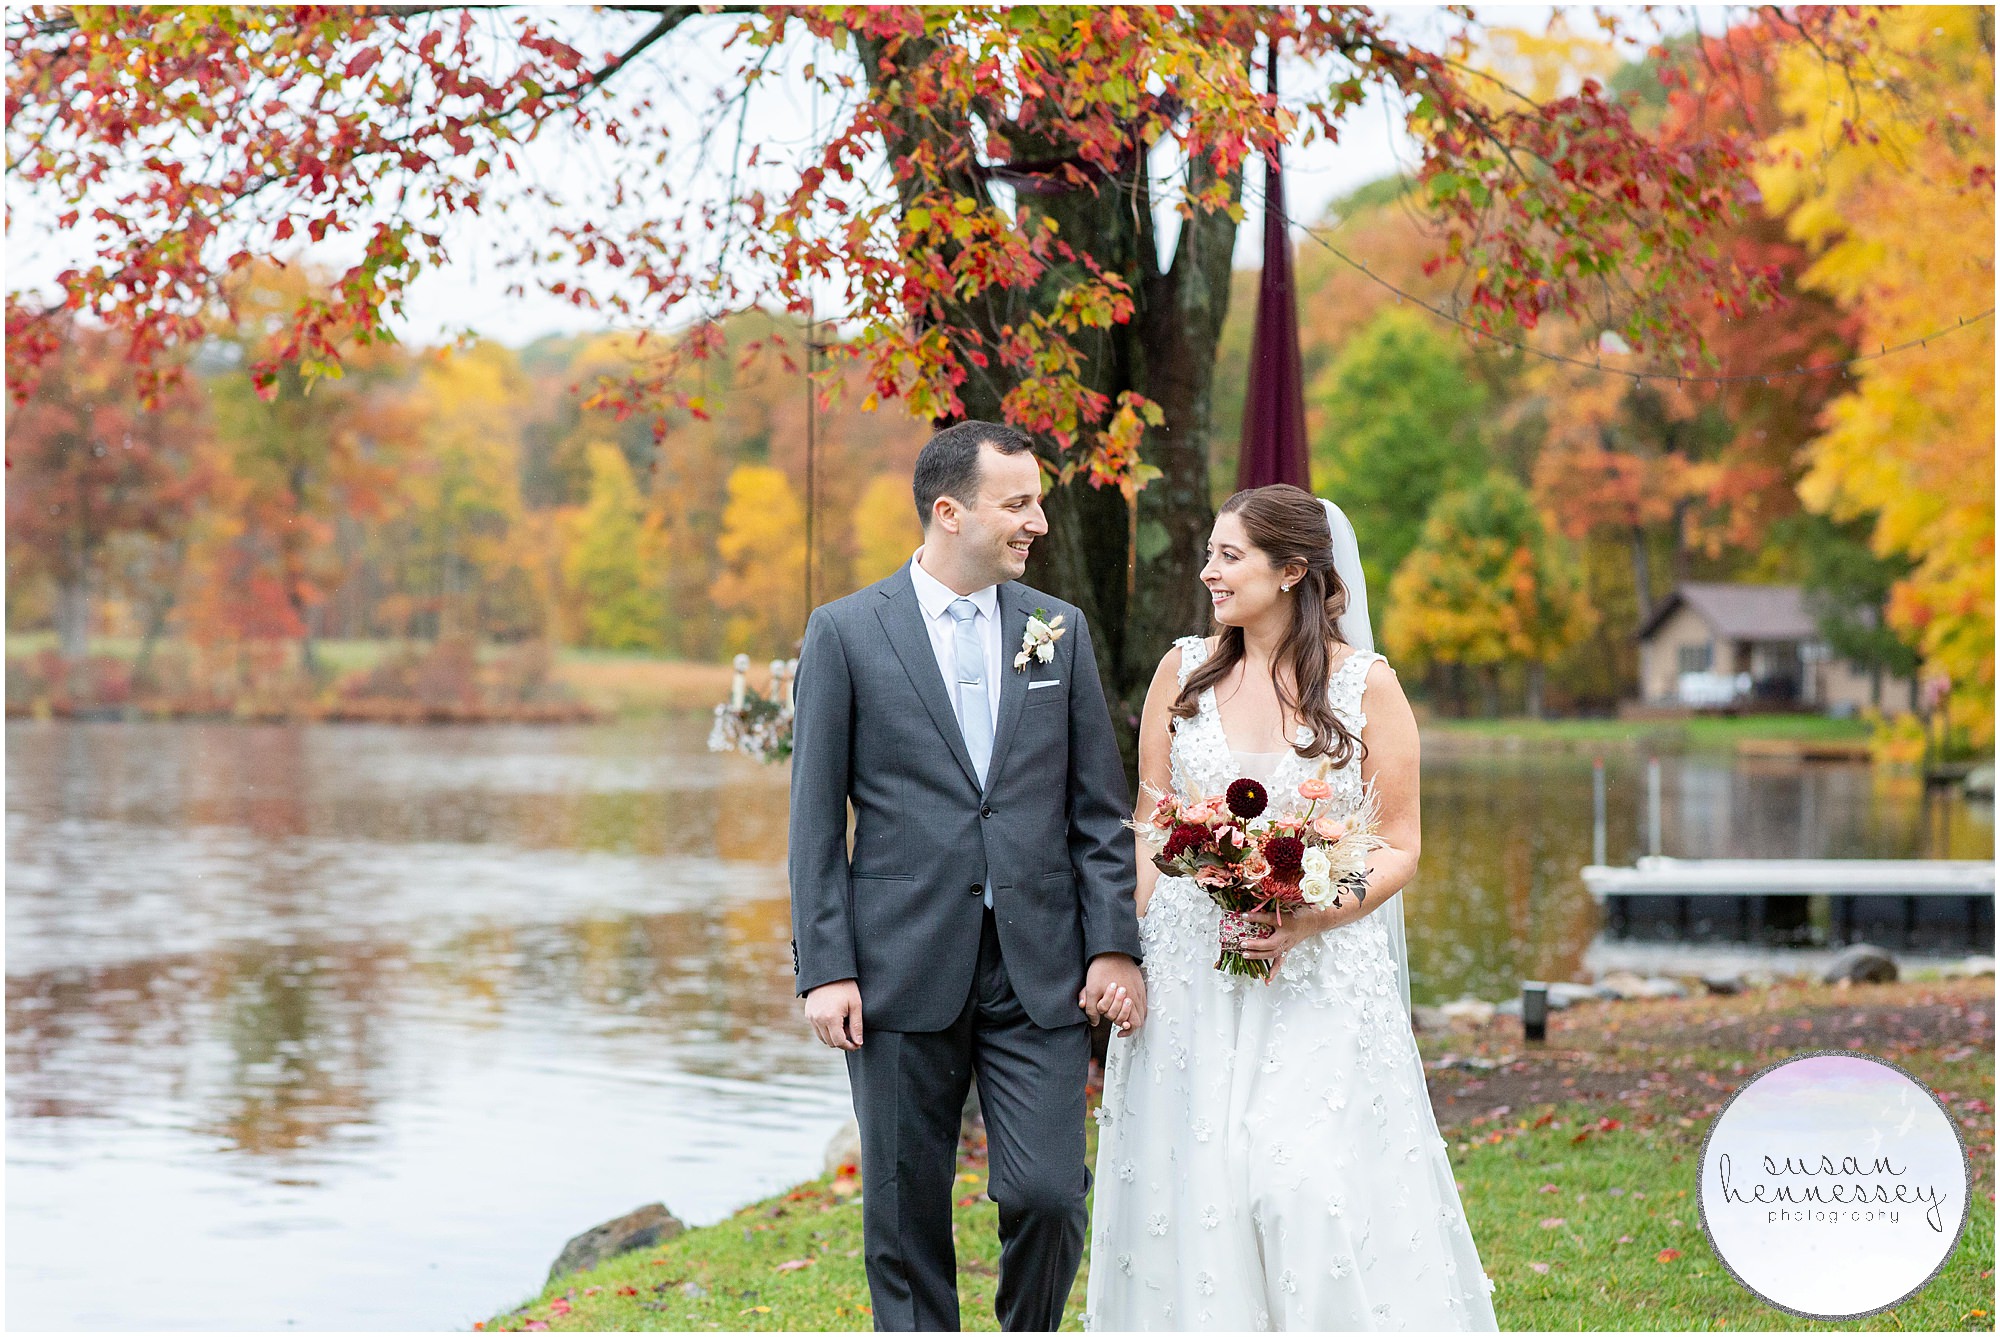 An intimate Andre's Lakeside Dining Microwedding